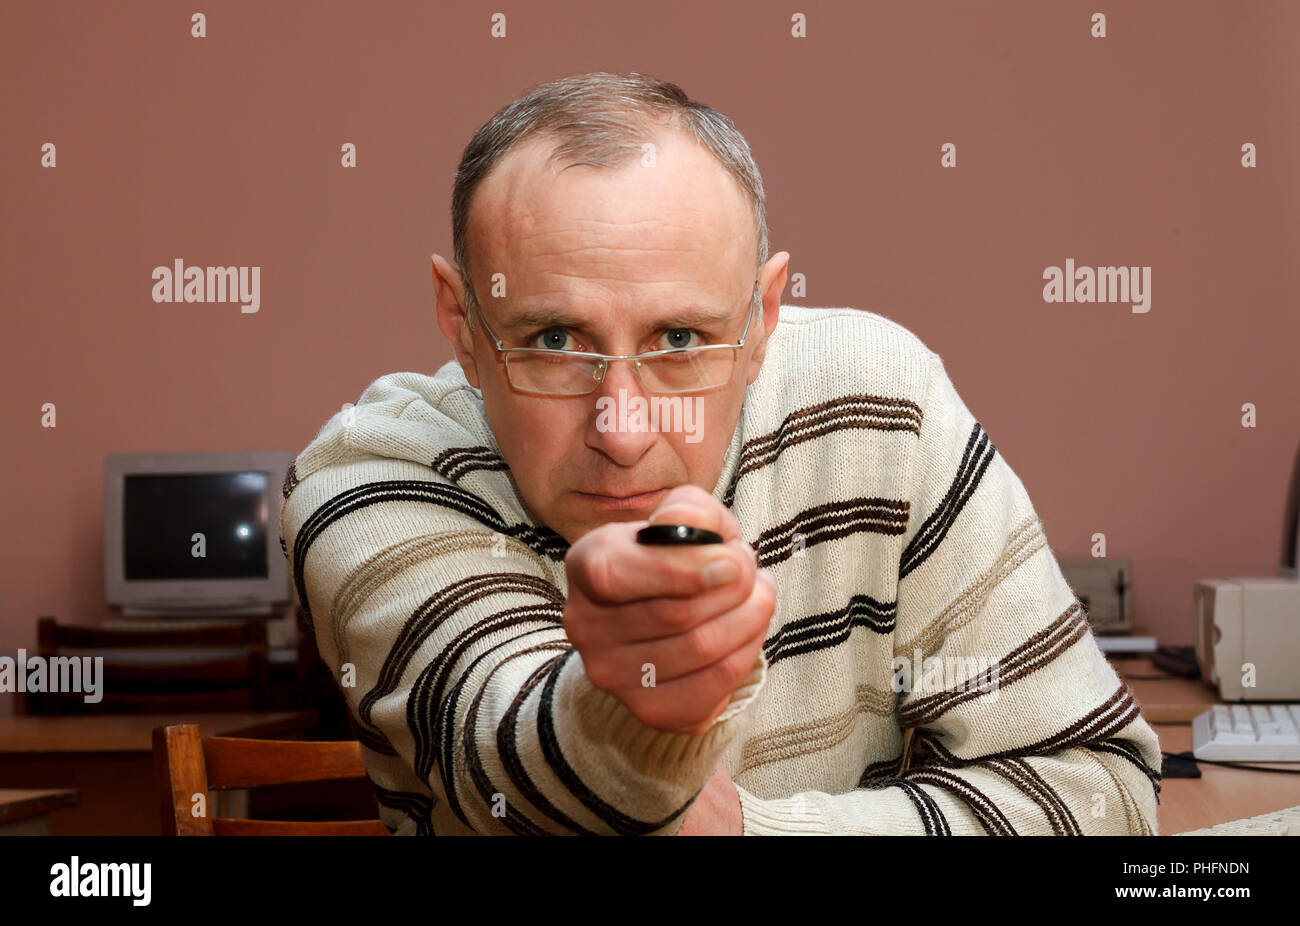 Man with remote control Stock Photo